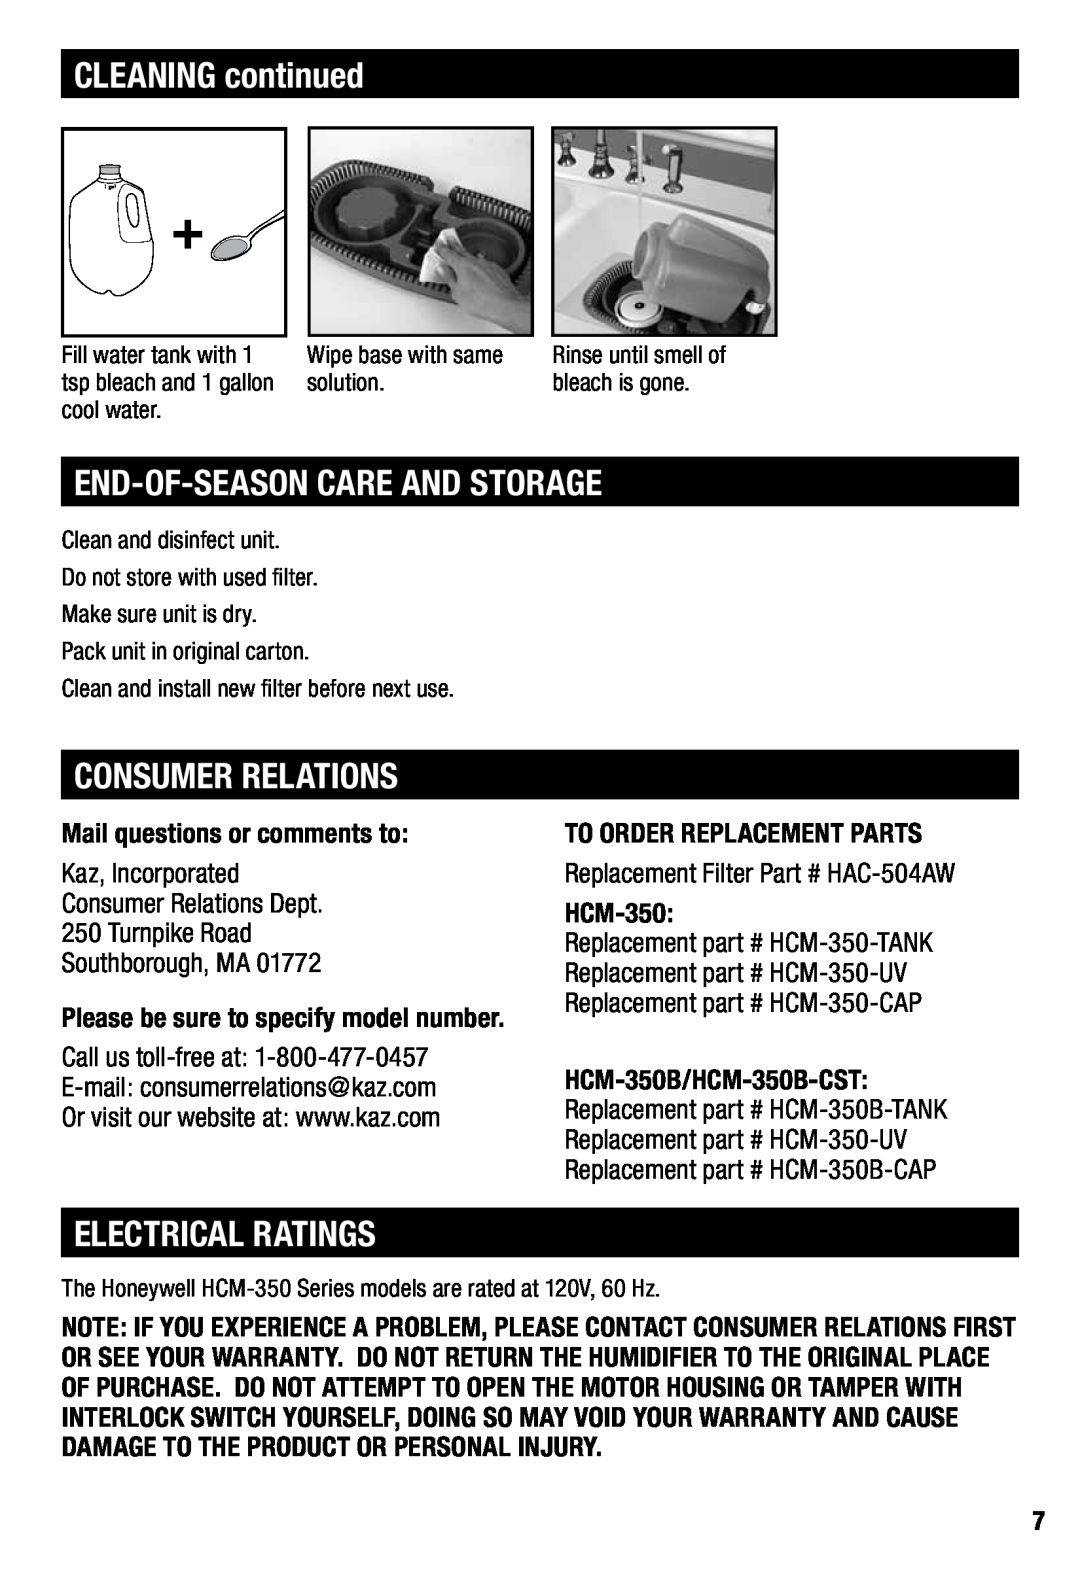 Honeywell HCM350 CLEANING continued, End-Of-Seasoncare And Storage, Consumer Relations, Electrical Ratings 